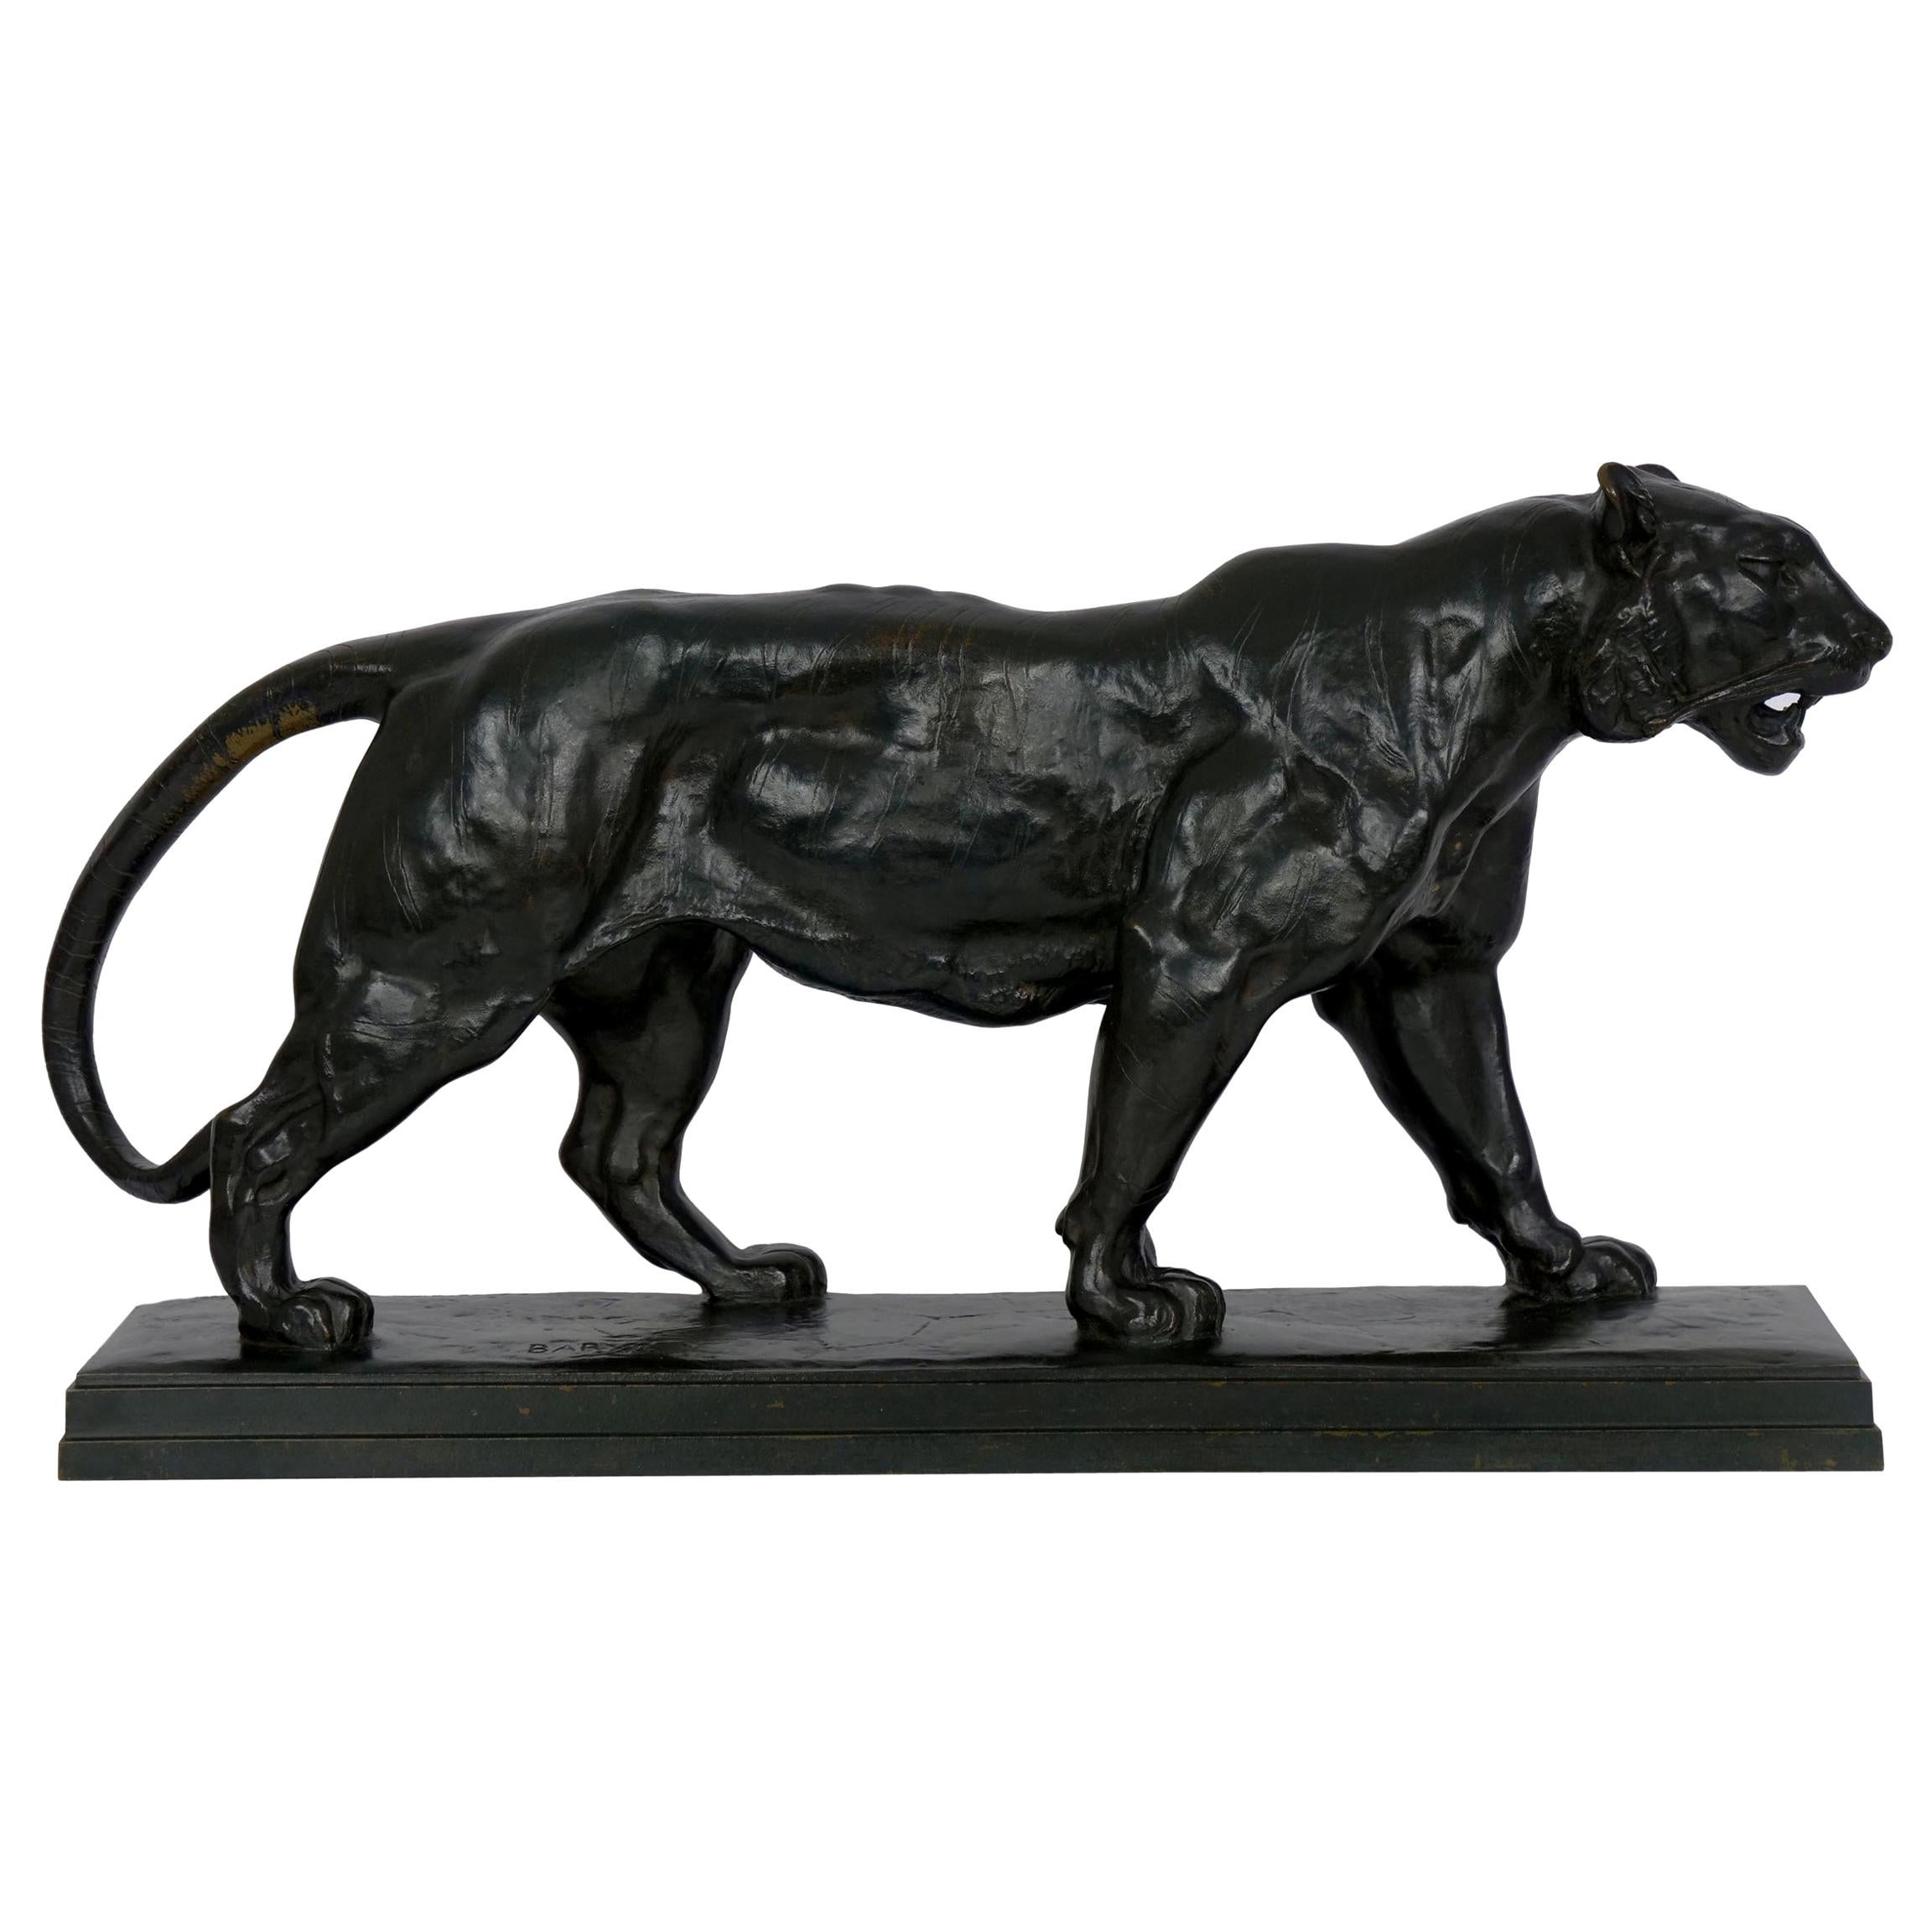 “Tigre Qui Marche” French Bronze Sculpture by Antoine-Louis Barye & Barbedienne